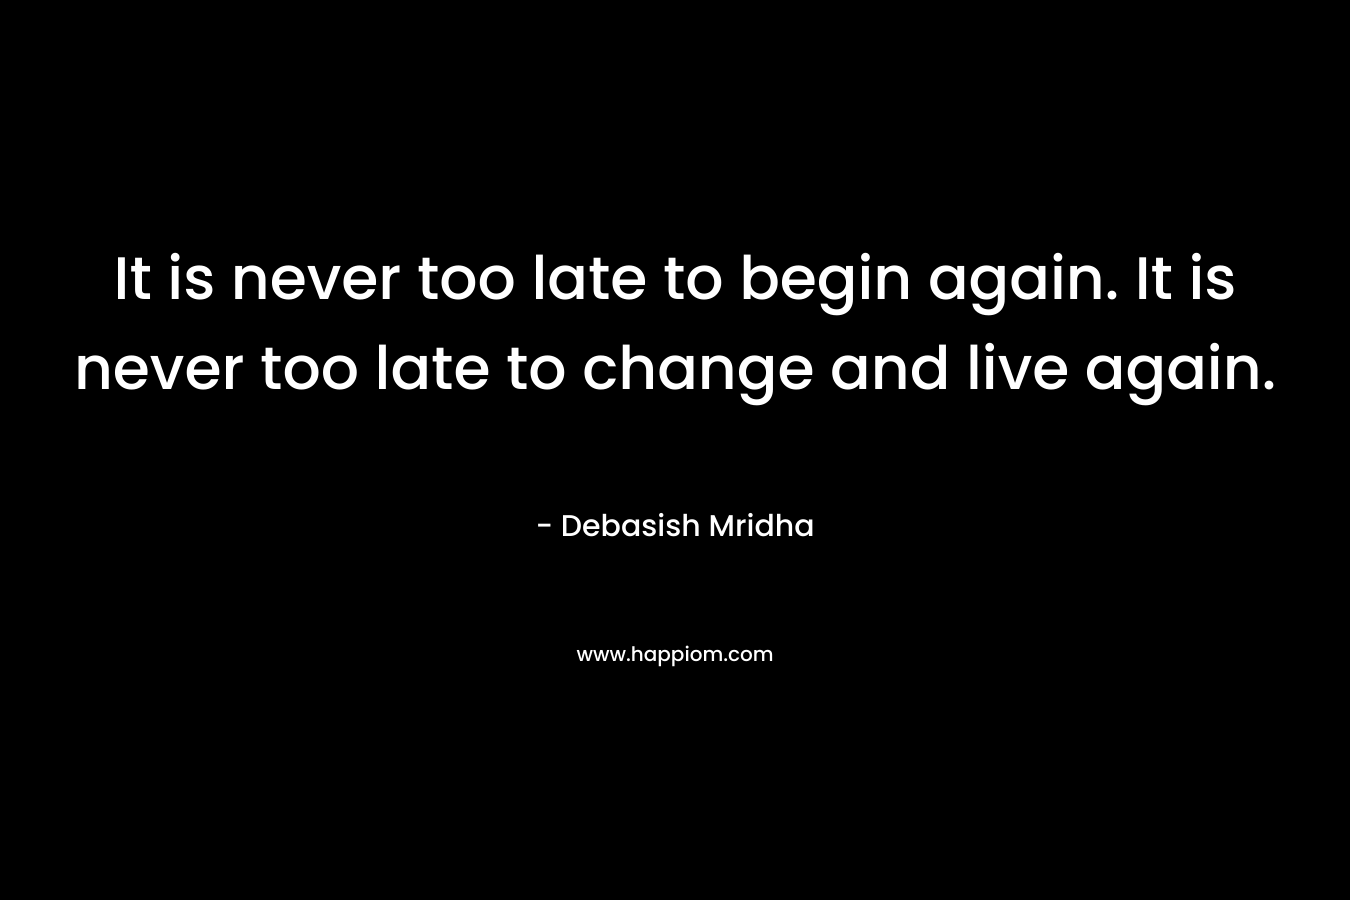 It is never too late to begin again. It is never too late to change and live again.